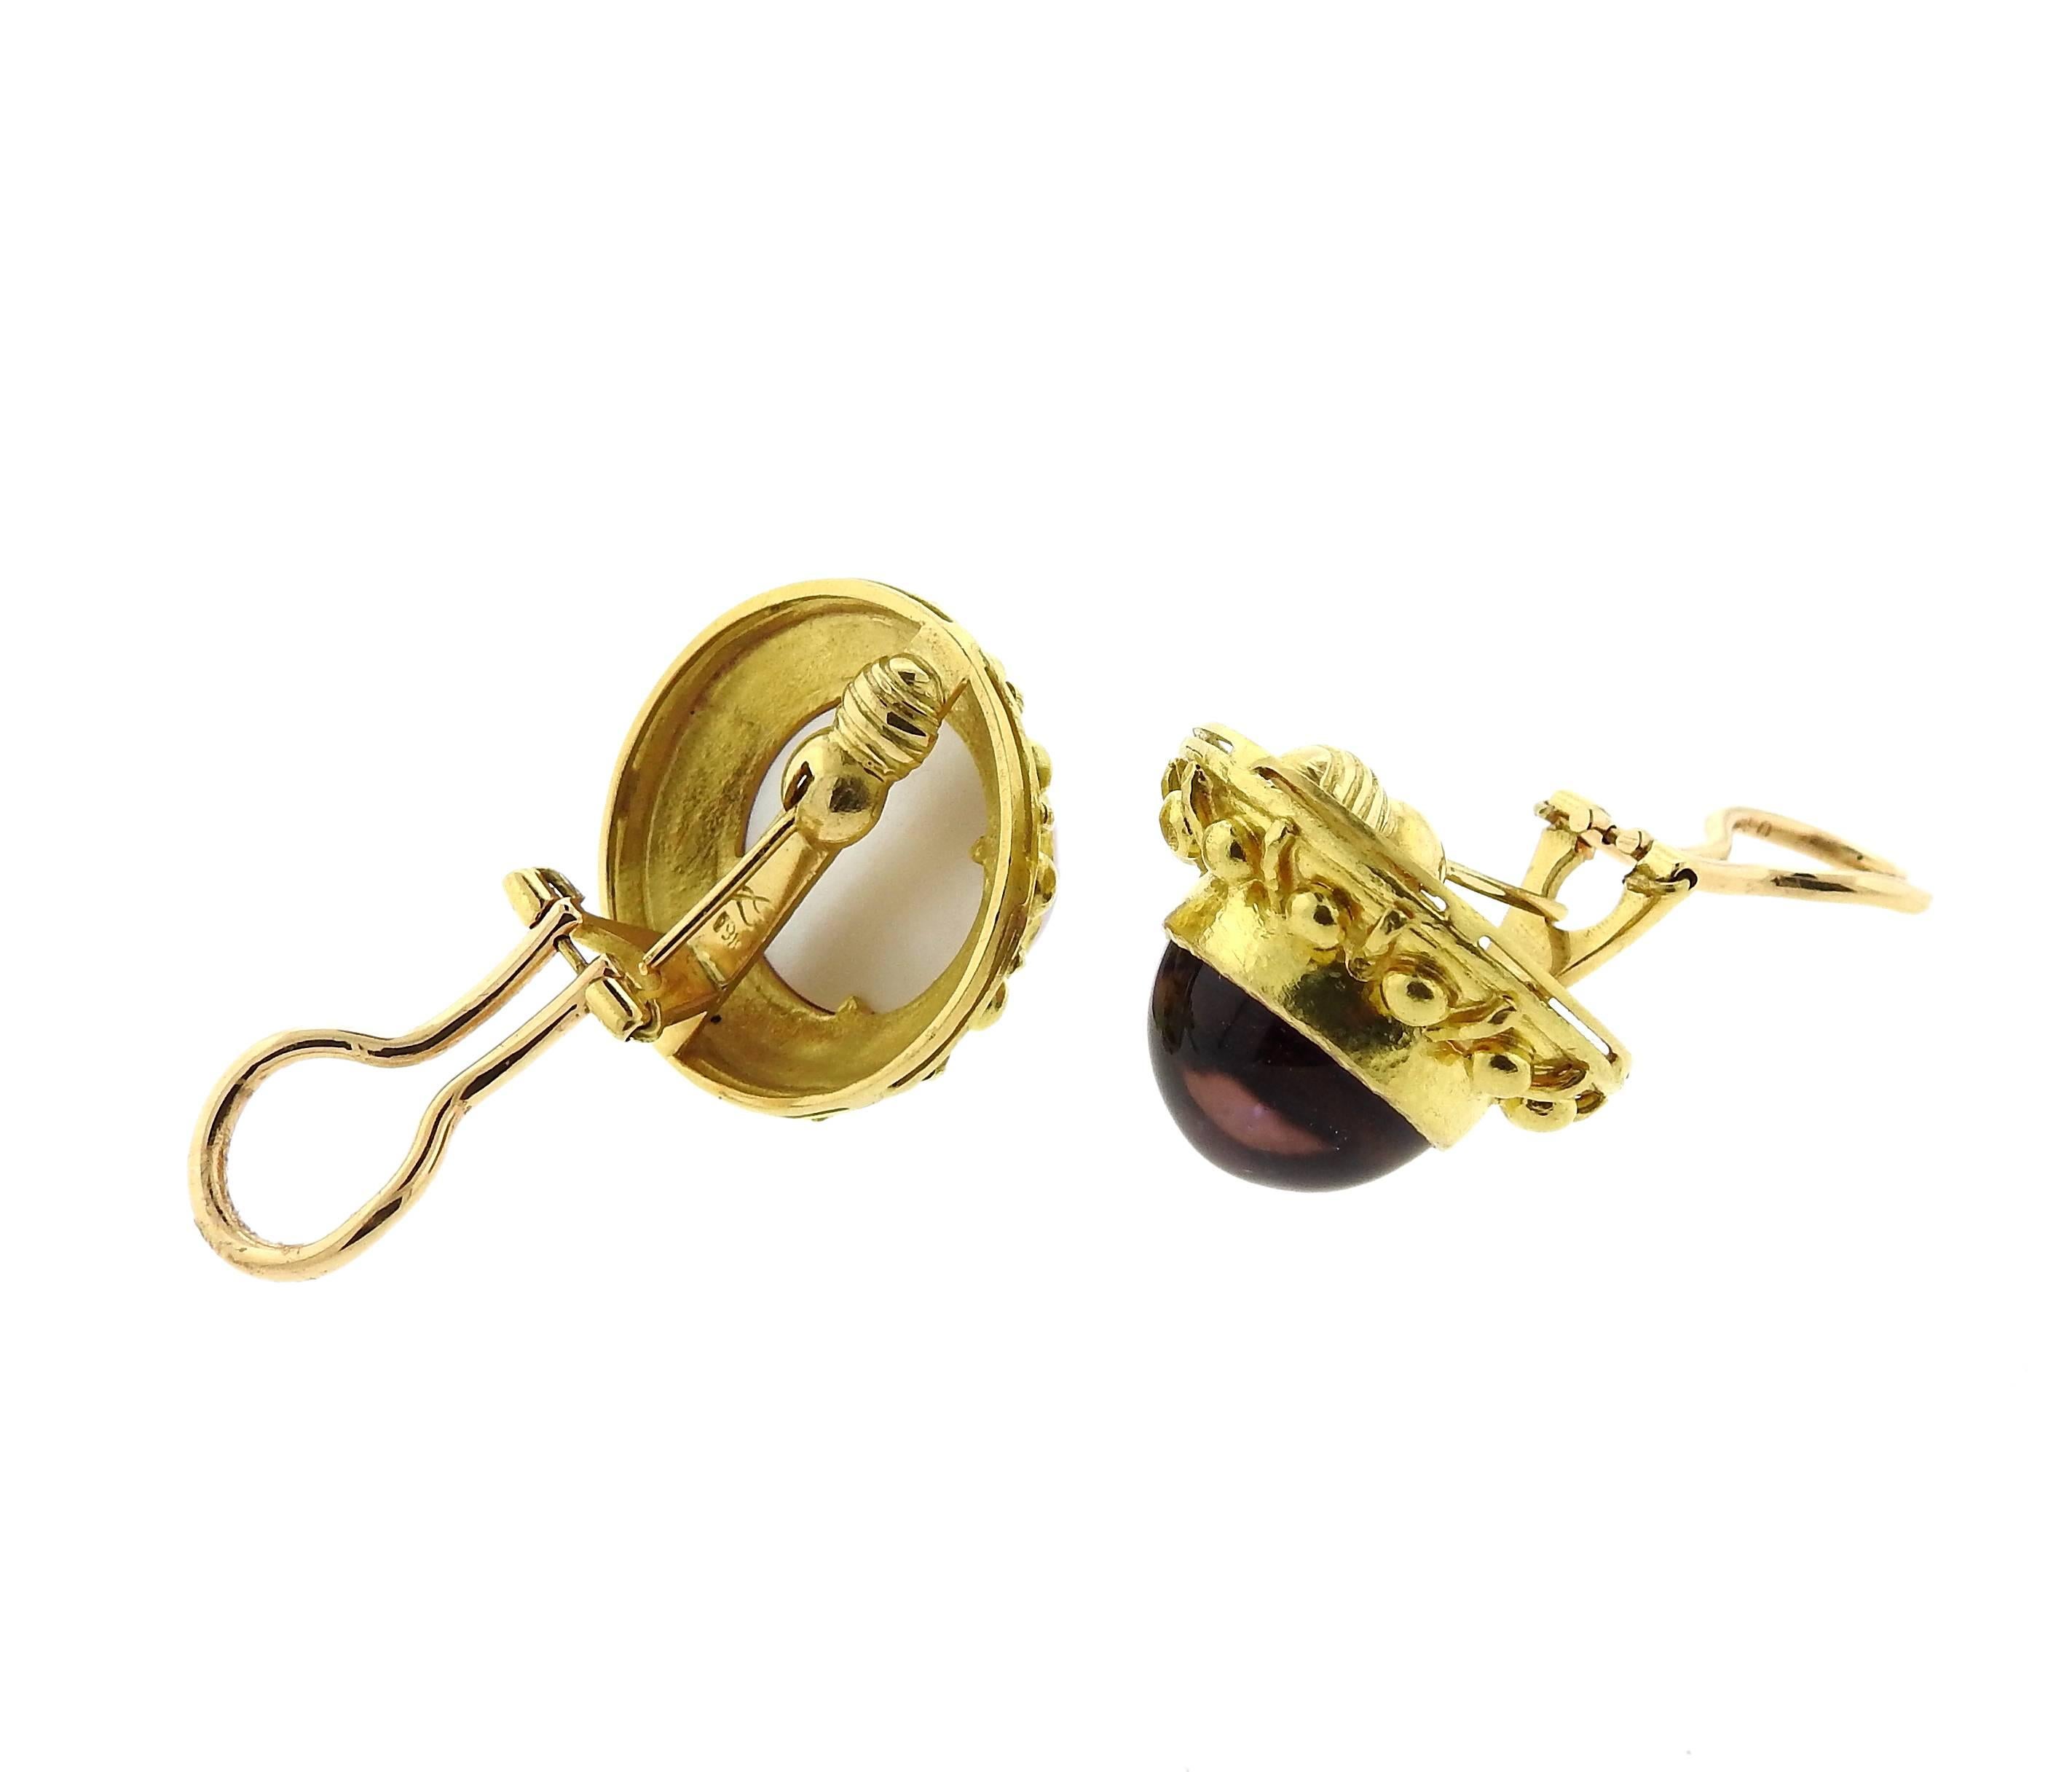 A pair of 19k gold earrings, crafted by Elizebath Locke, set with 14mm amethyst cabochons, backed with mother of pearl. Earrings are 23mm in diameter. Marked with Locke E mark and 19k. Weight - 25.6 grams 